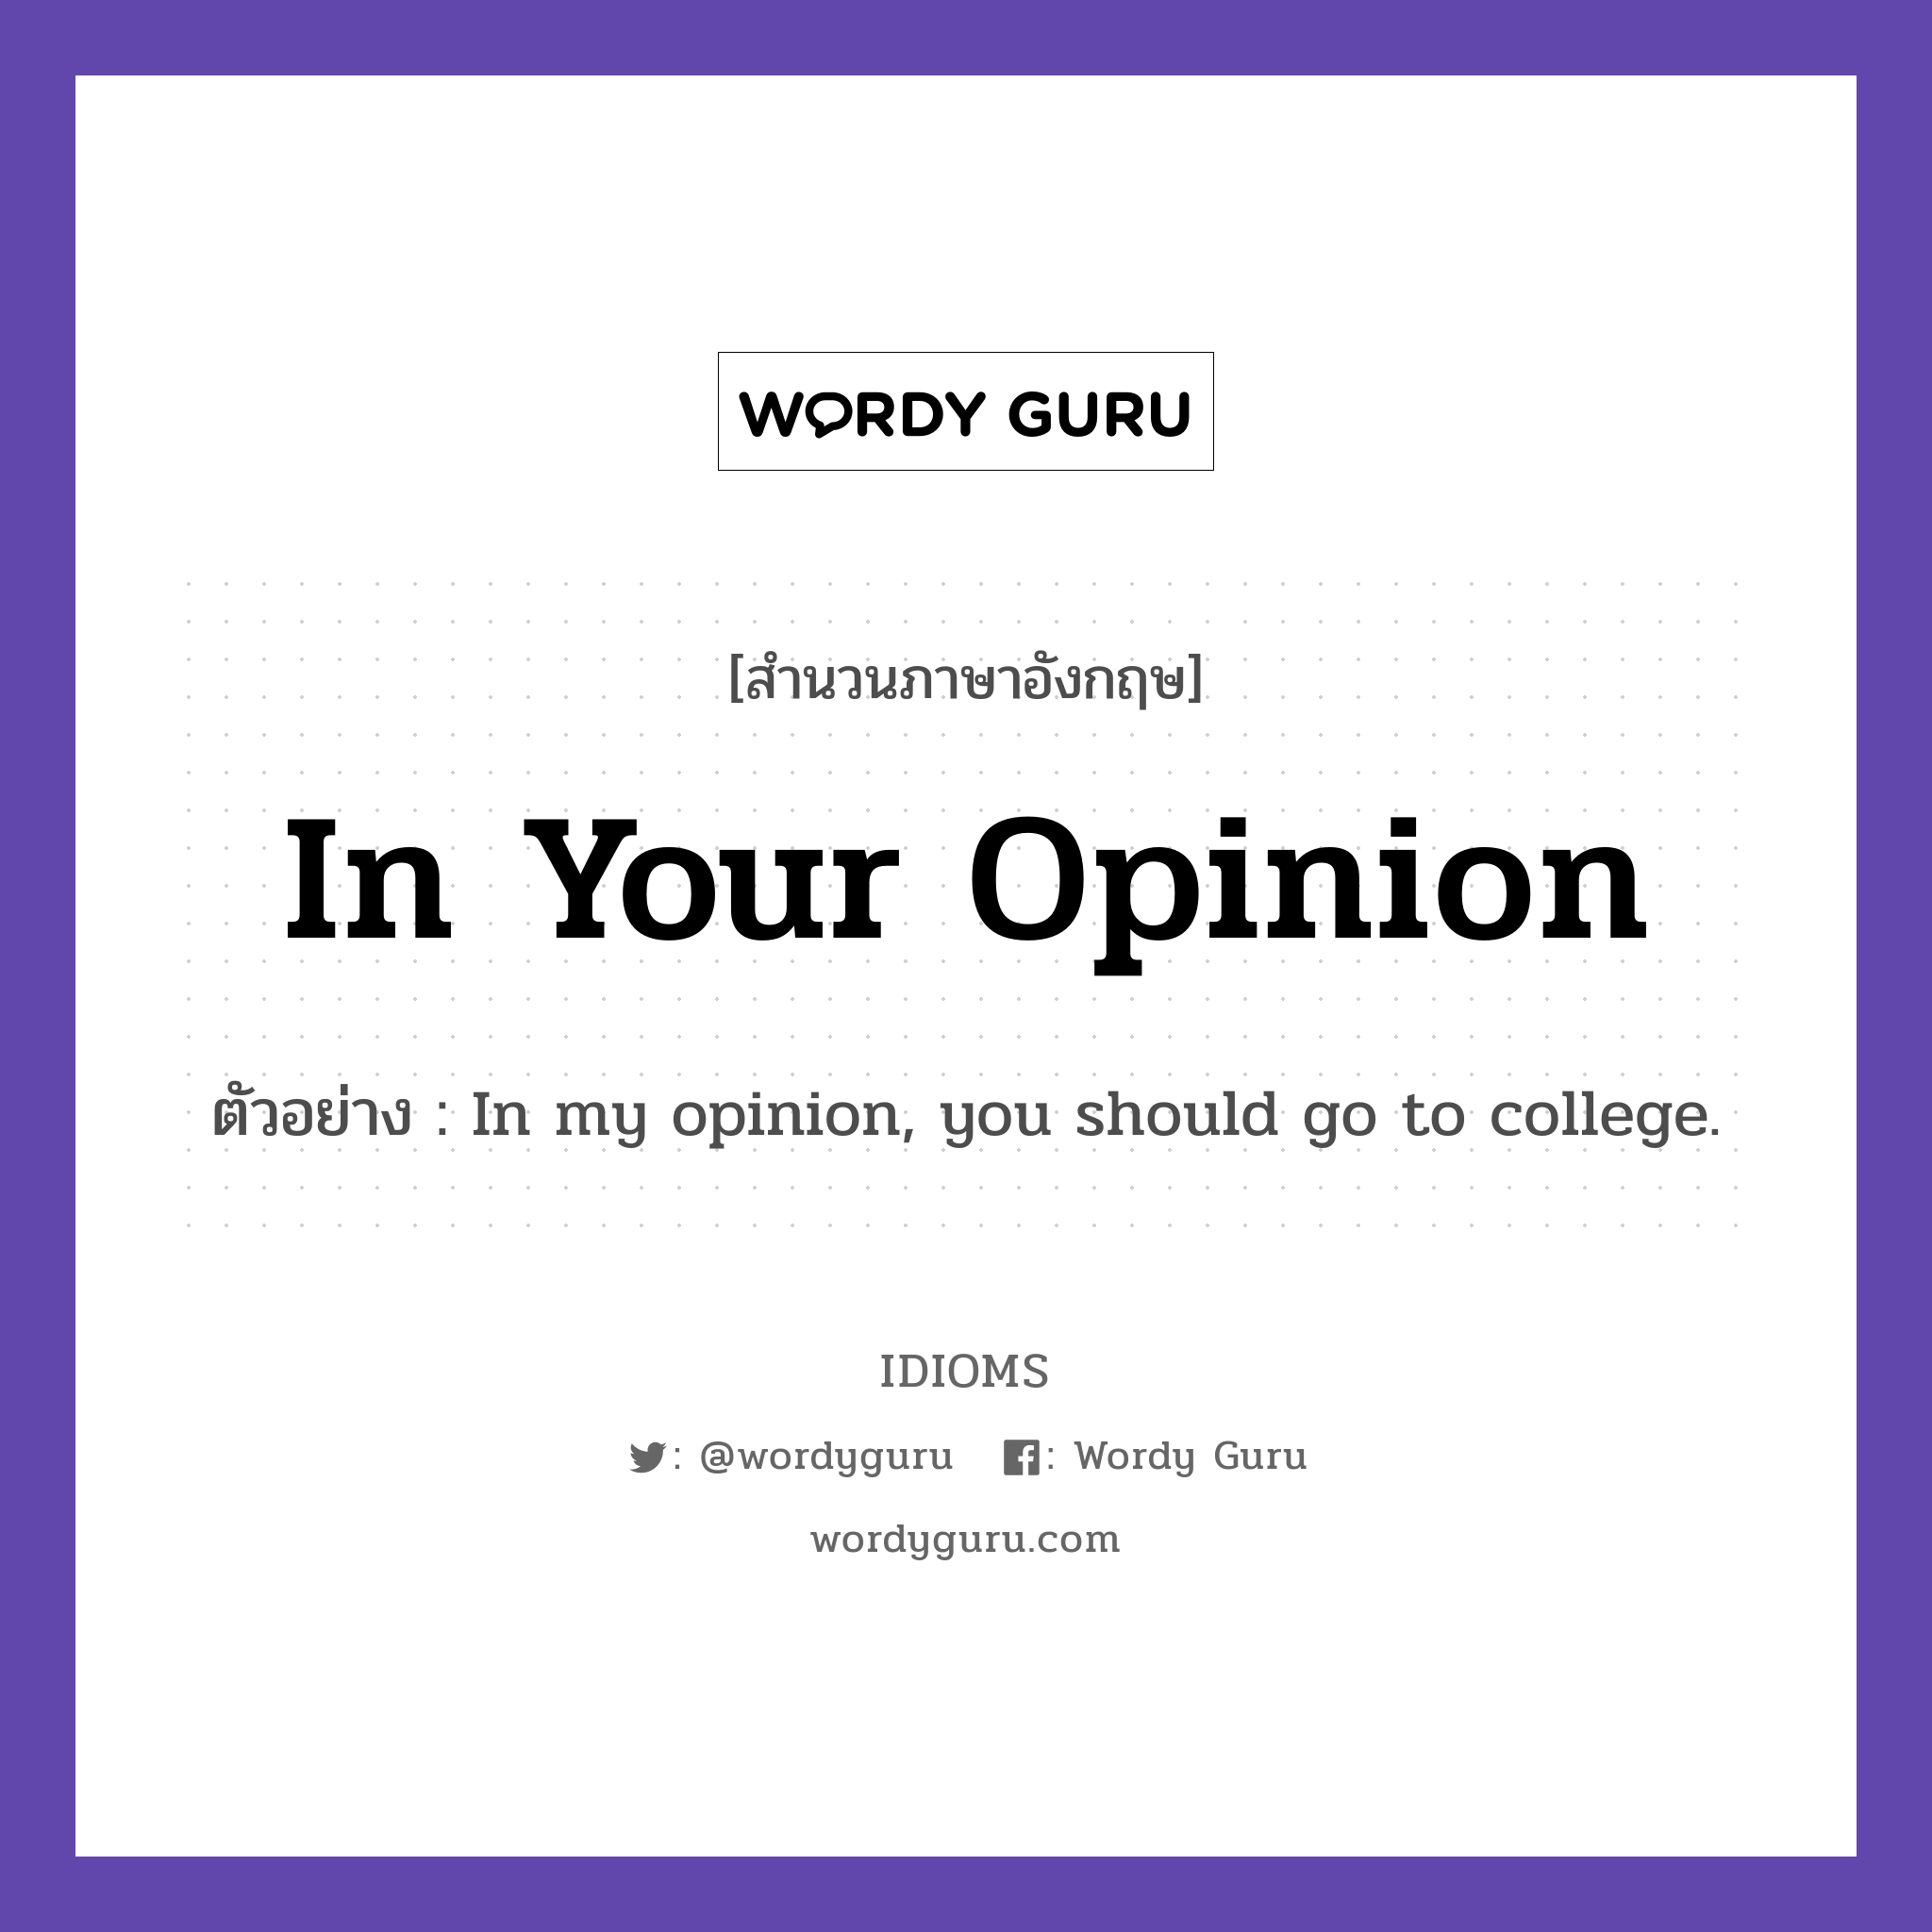 In Your Opinion แปลว่า?, สำนวนภาษาอังกฤษ In Your Opinion ตัวอย่าง In my opinion, you should go to college.